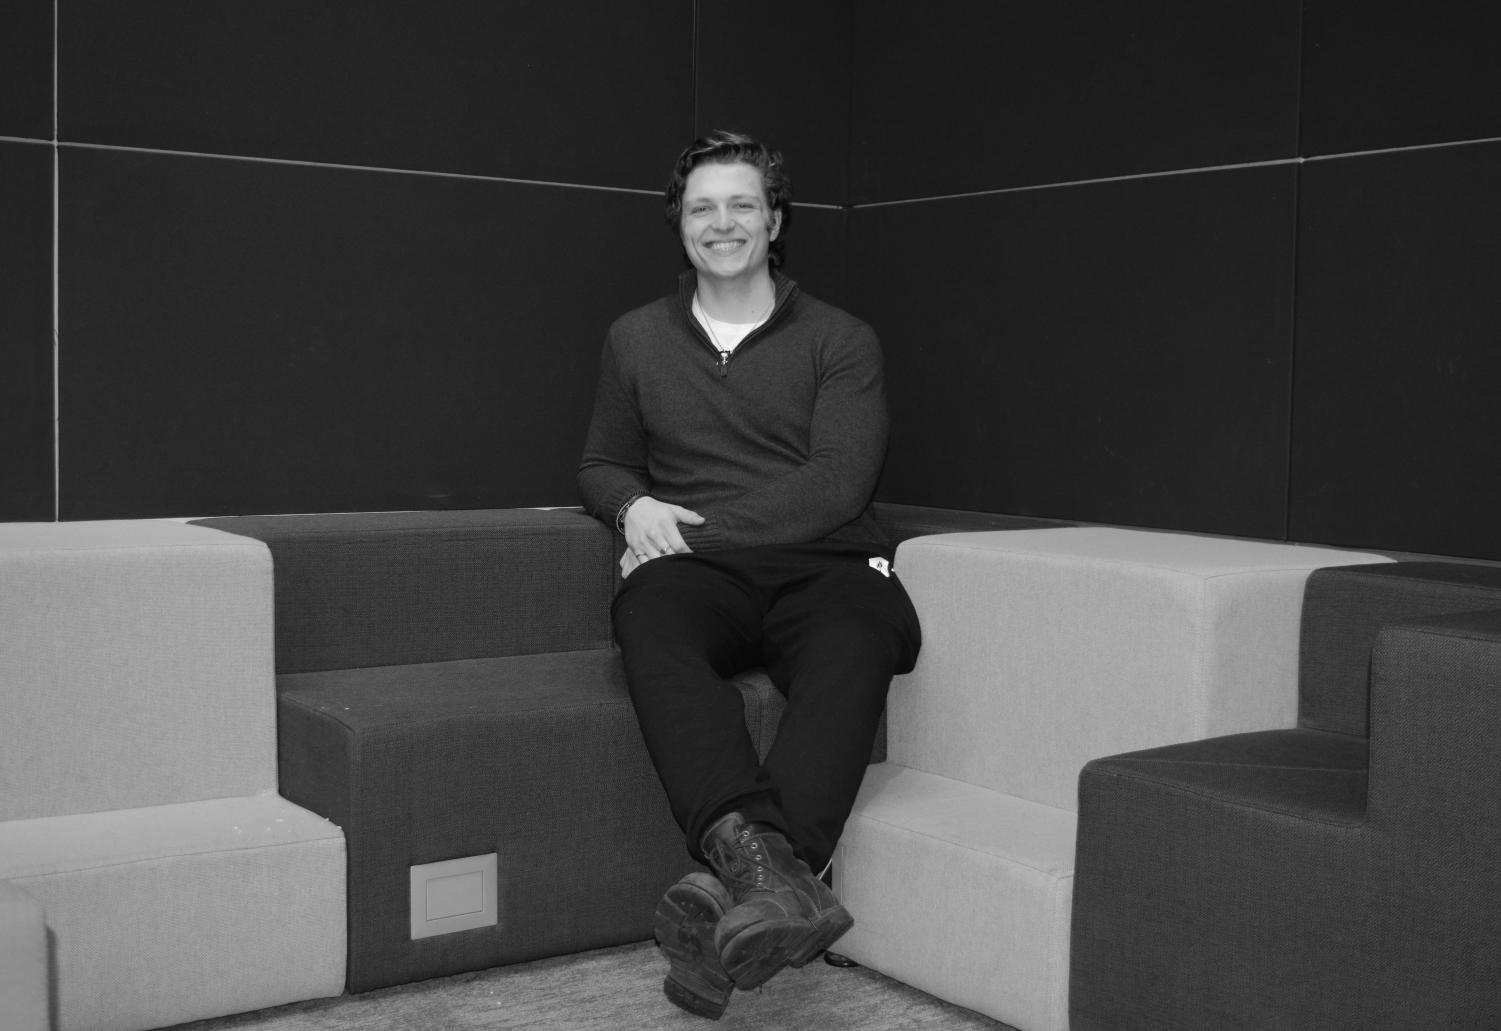 A black-and-white image of a male college student with combed hair, a long-sleeved quarter zip top, dark joggers, and dark boots smiling at the camera while sitting on a couch.